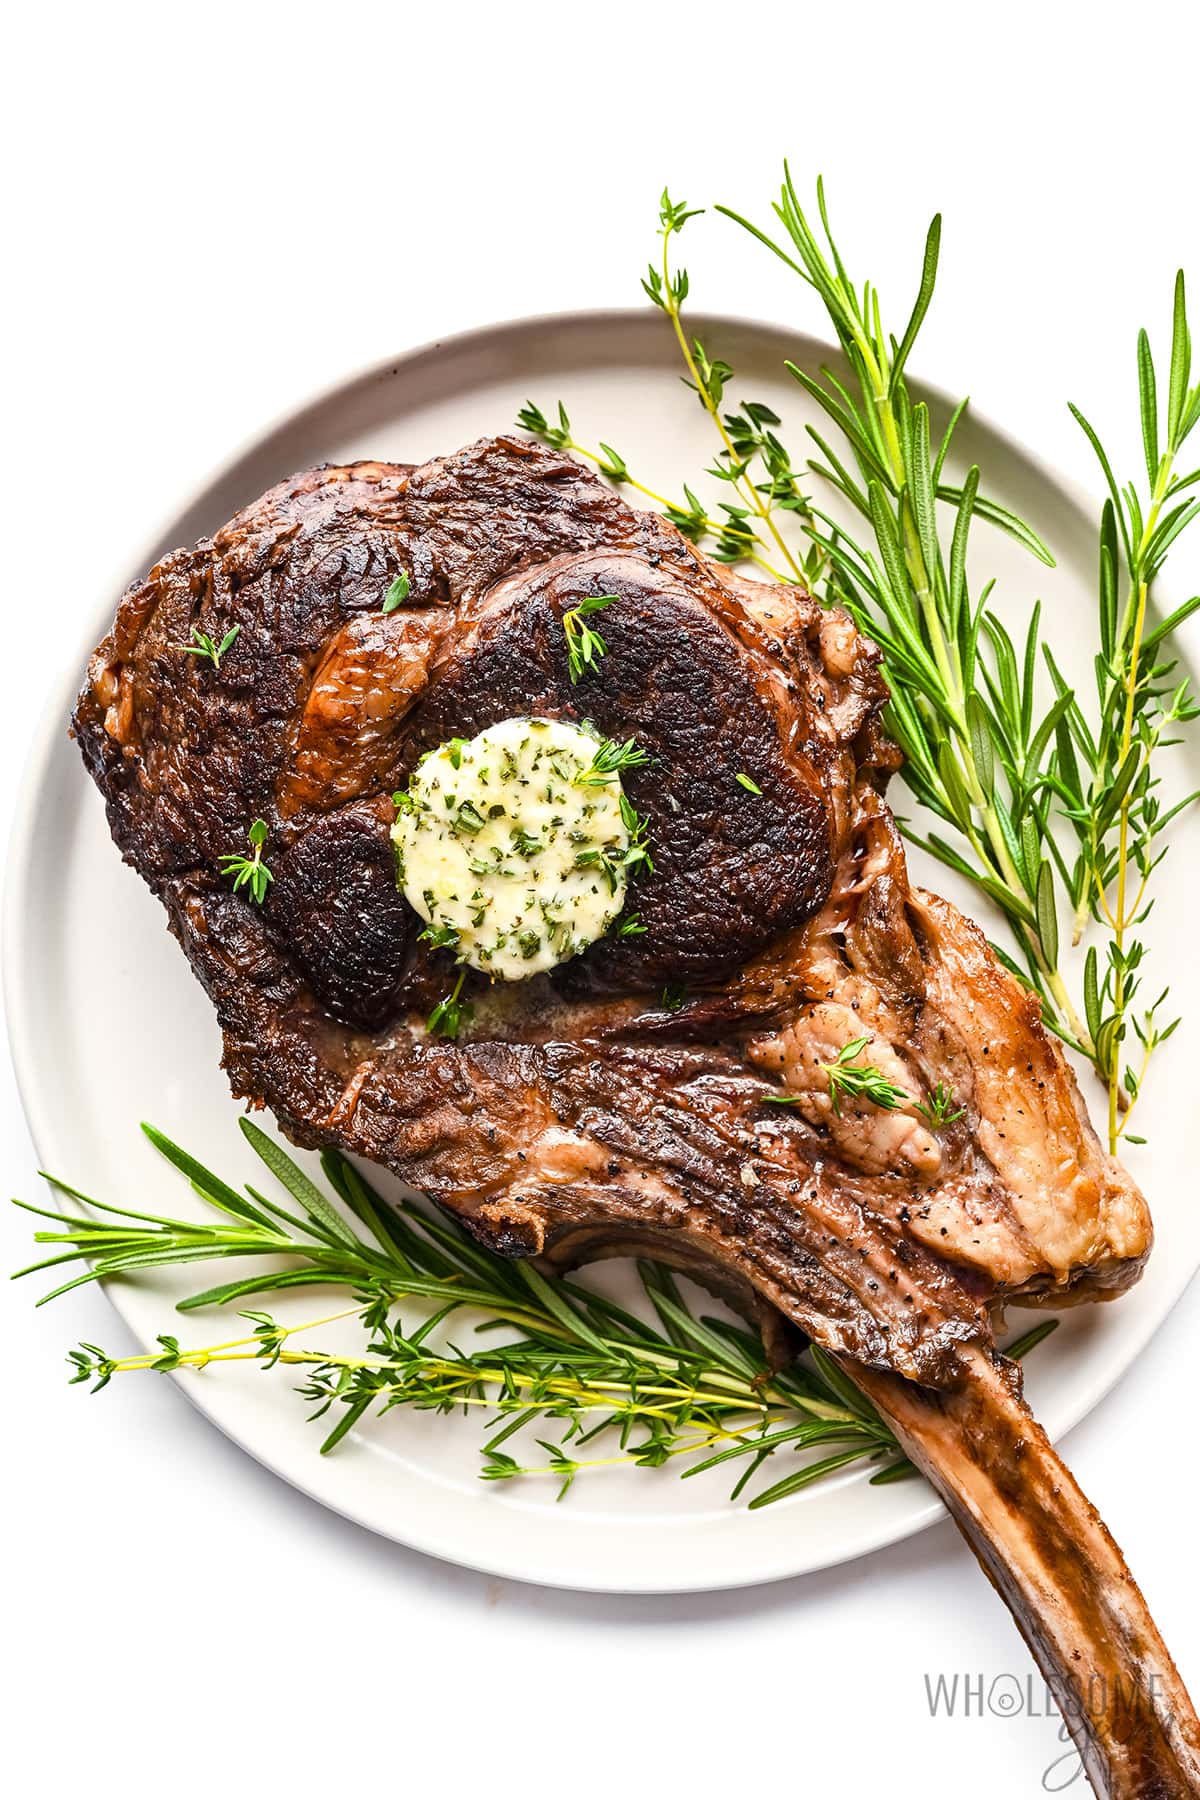 Tomahawk steak on a plate with herbs.